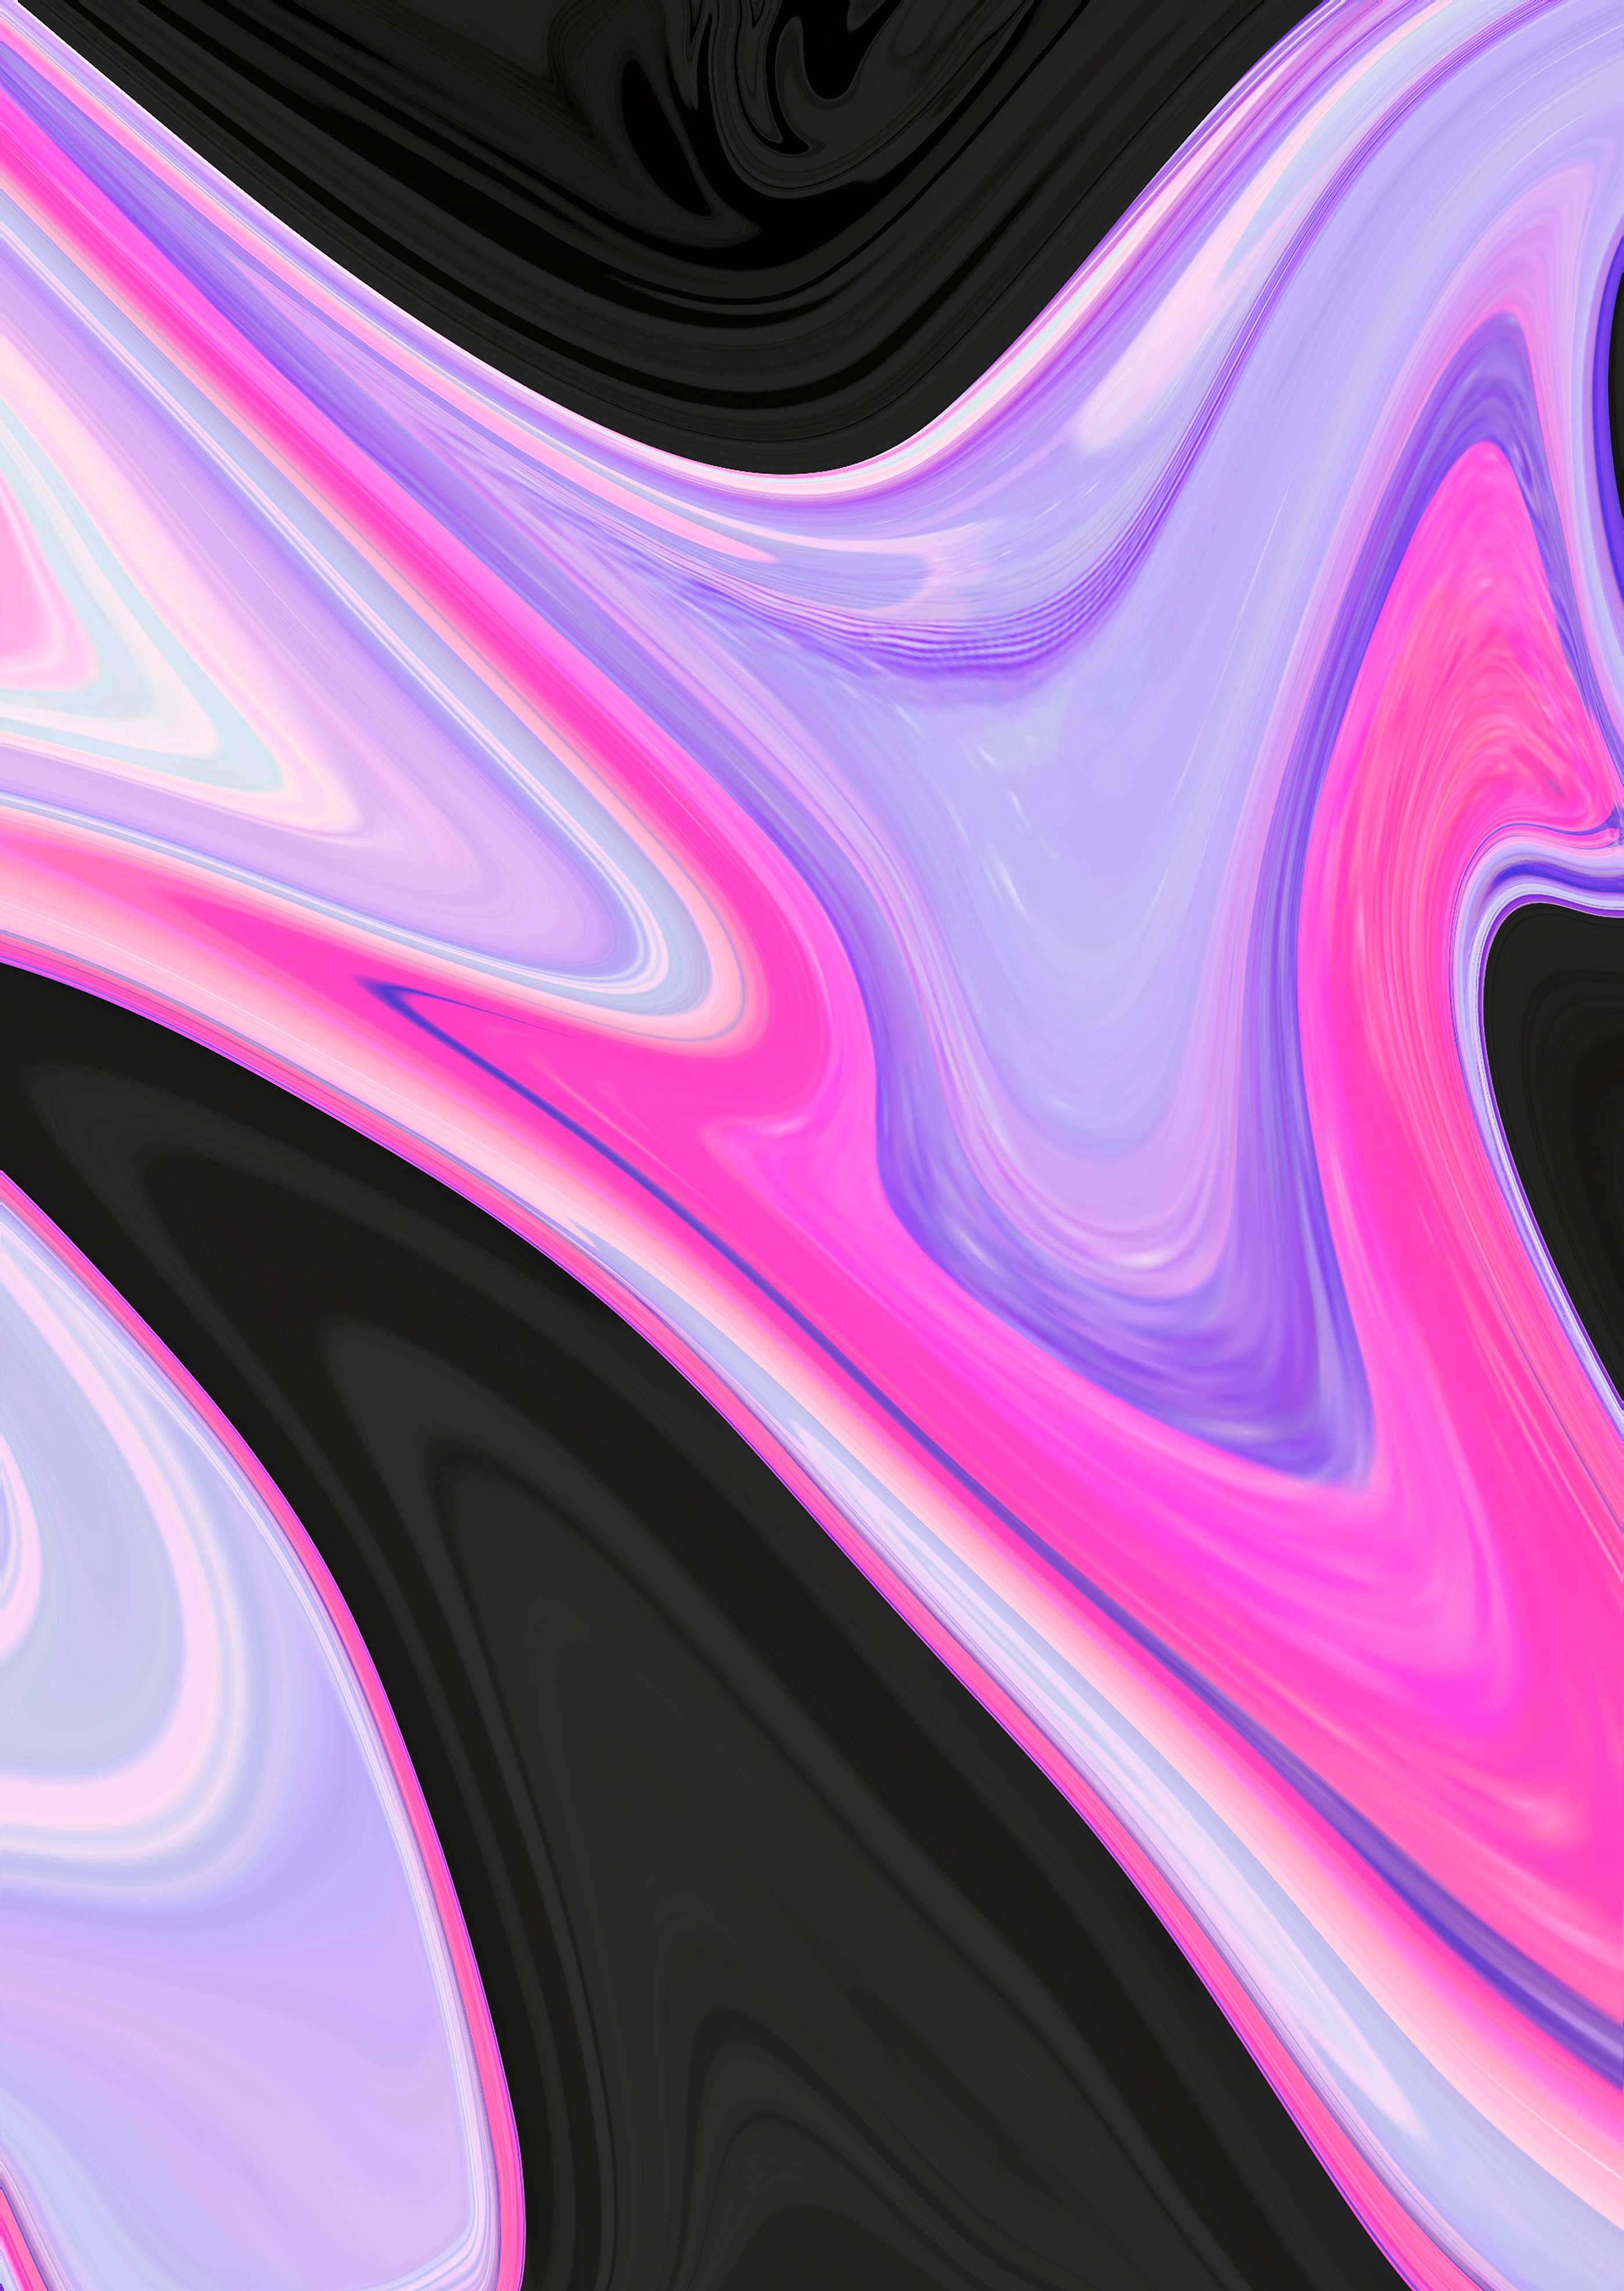 wavy, pink, abstract, black, lines, lilac, paint QHD